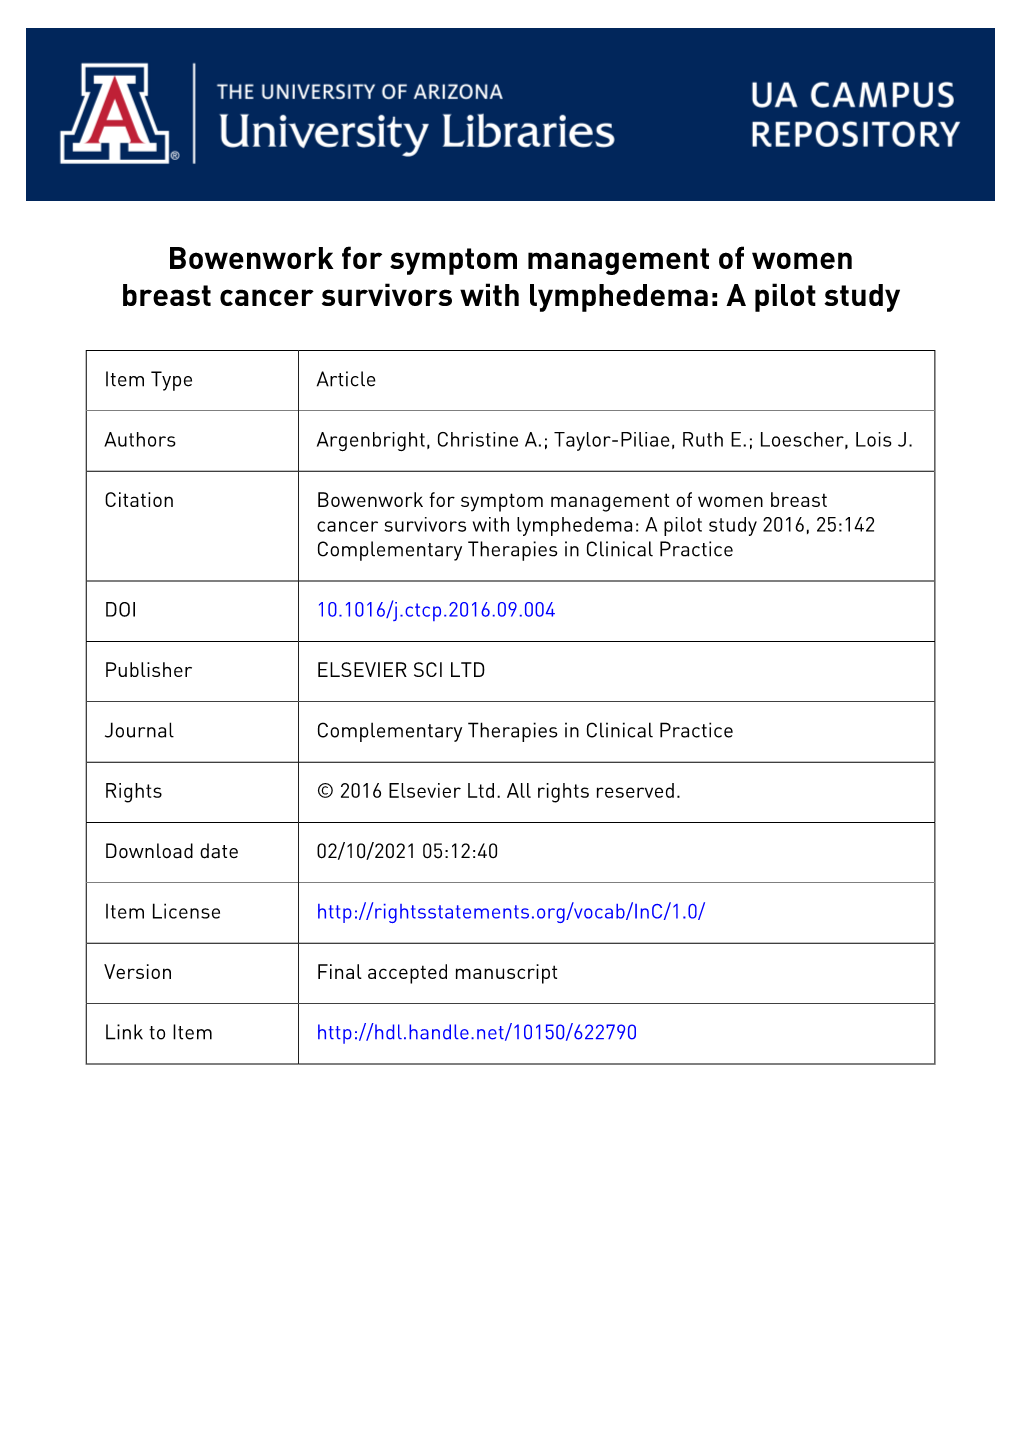 Bowenwork for Symptom Management of Women Breast Cancer Survivors with Lymphedema: a Pilot Study